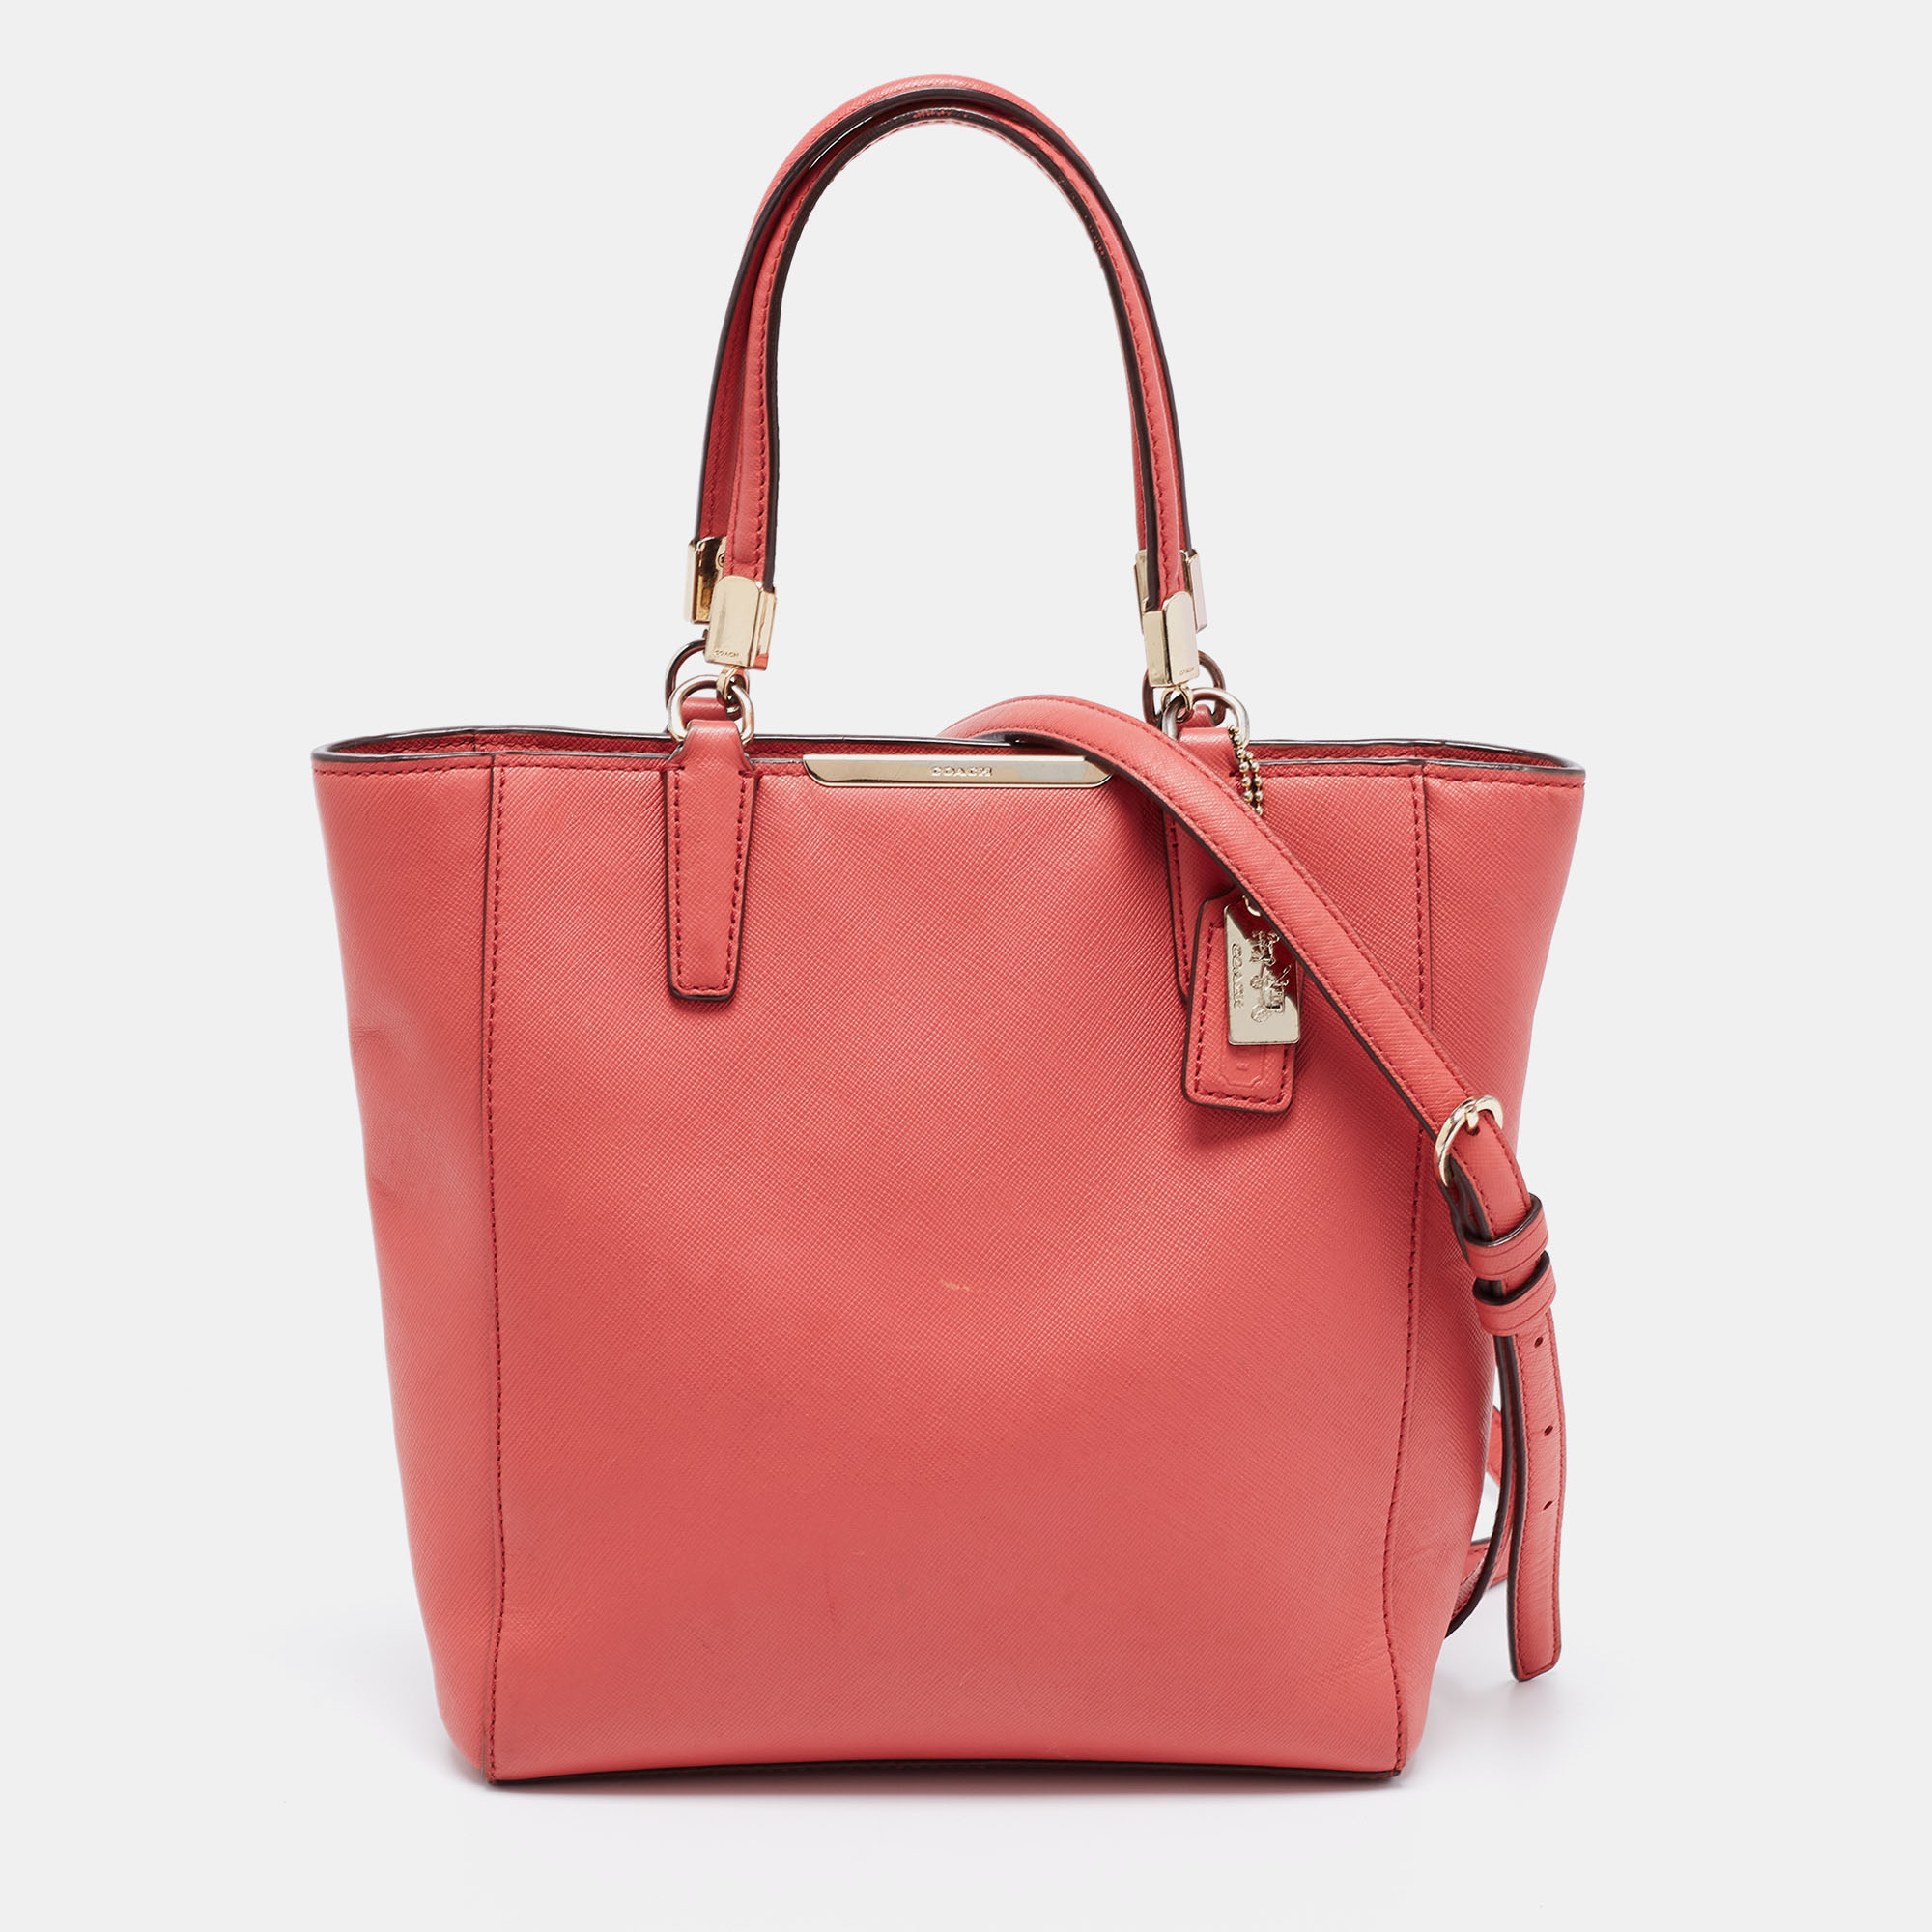 This tote is a result of blending high crafting skills with a practical design. It arrives in a durable exterior and is completed by luxe detailing. It is an accessory that you can count on.